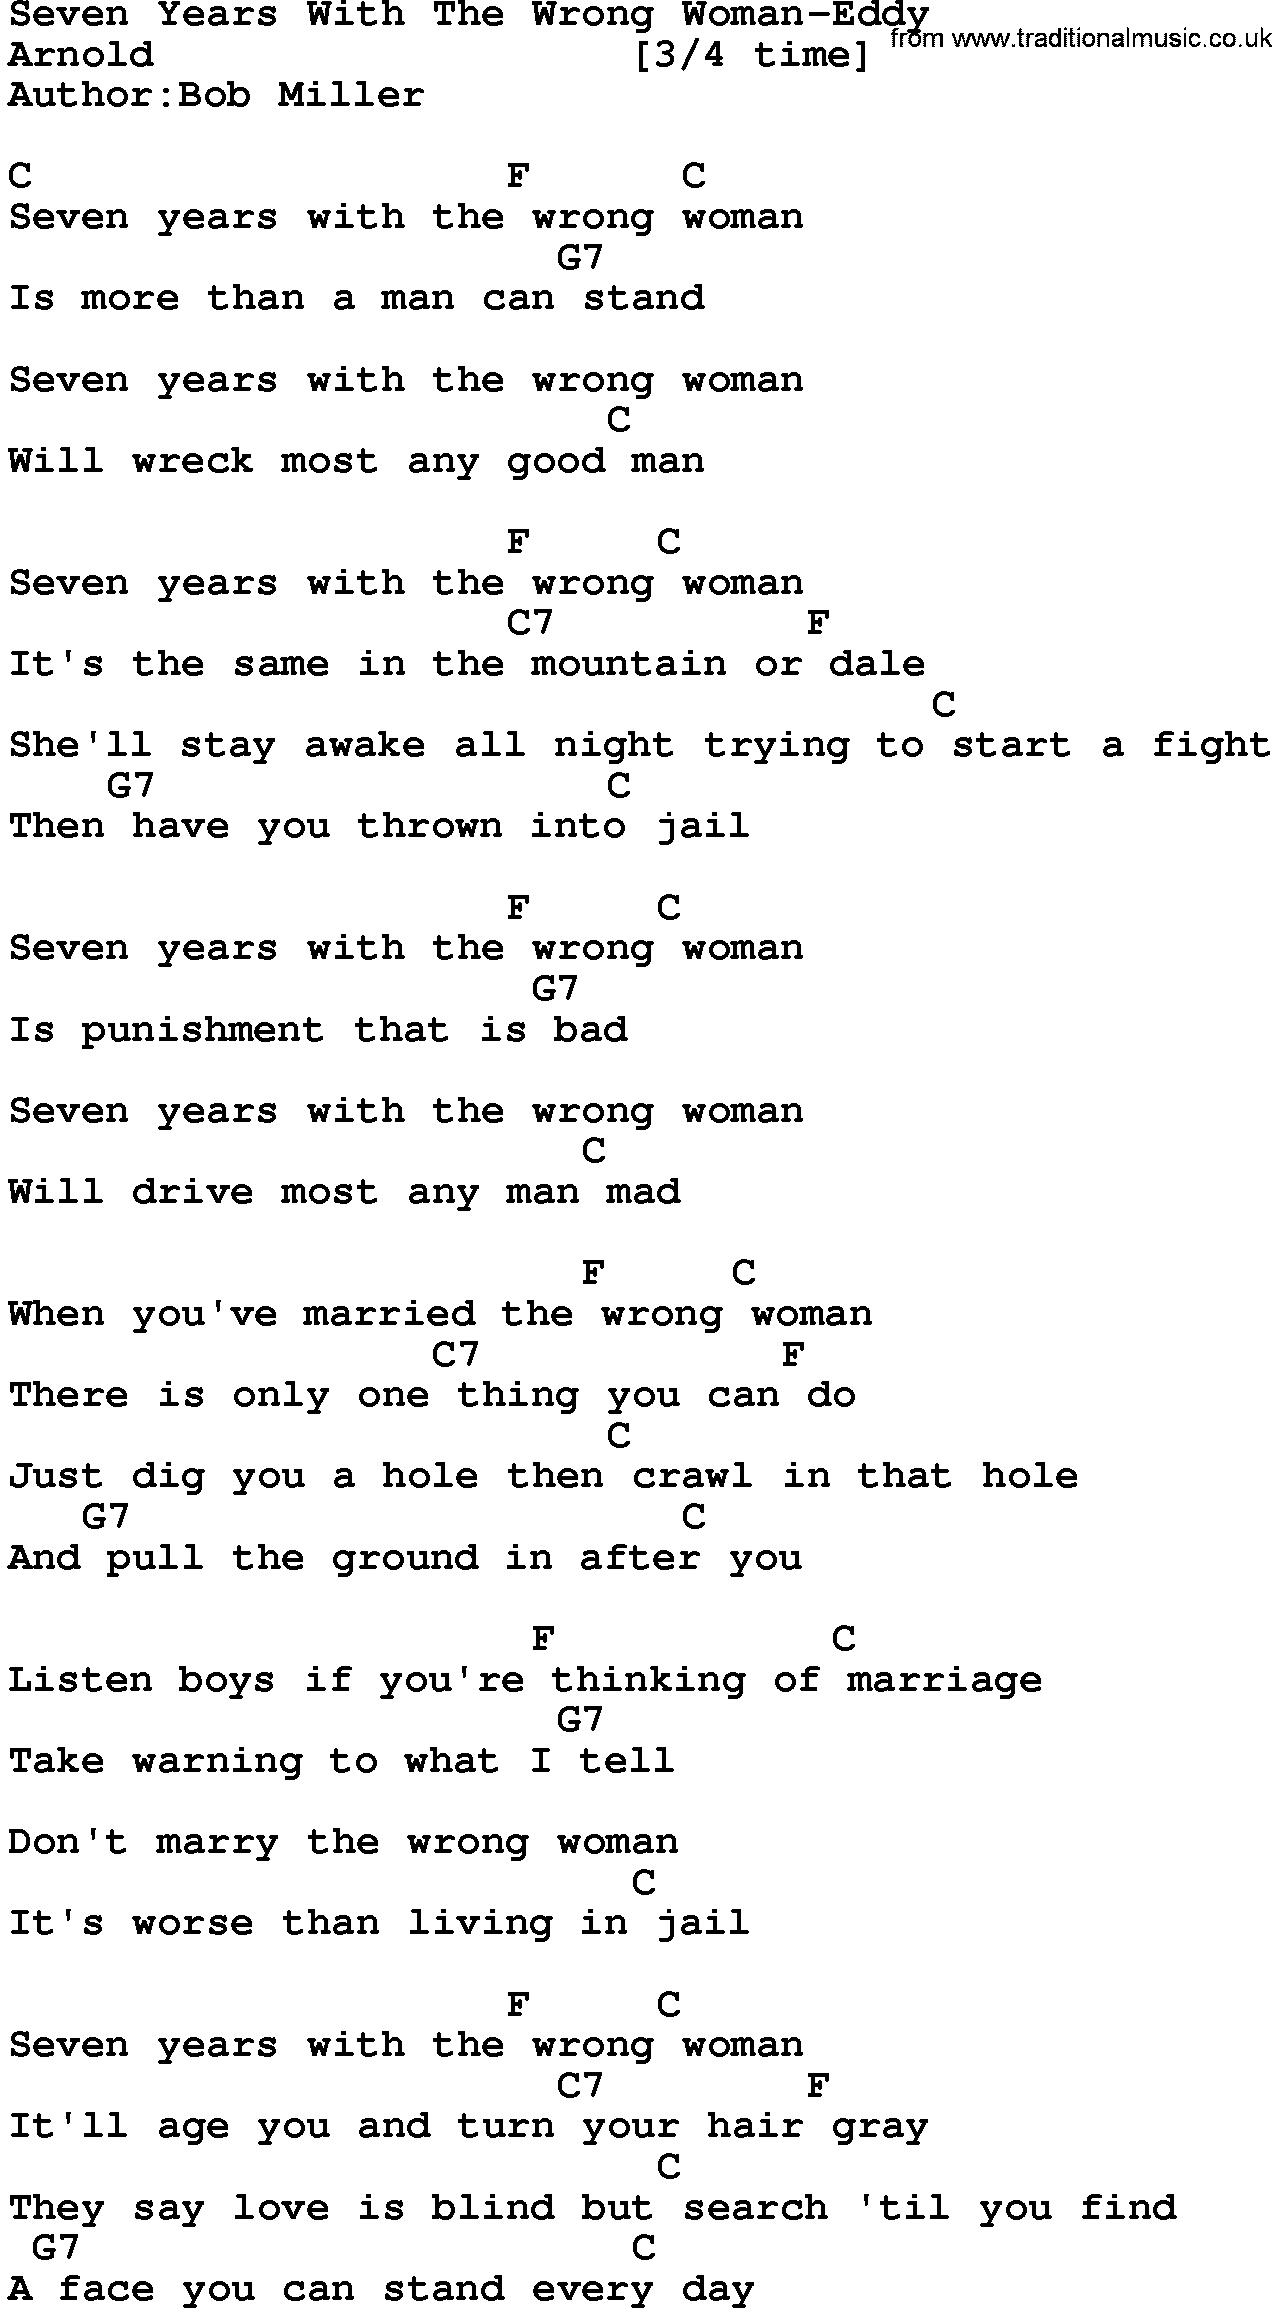 Country music song: Seven Years With The Wrong Woman-Eddy lyrics and chords